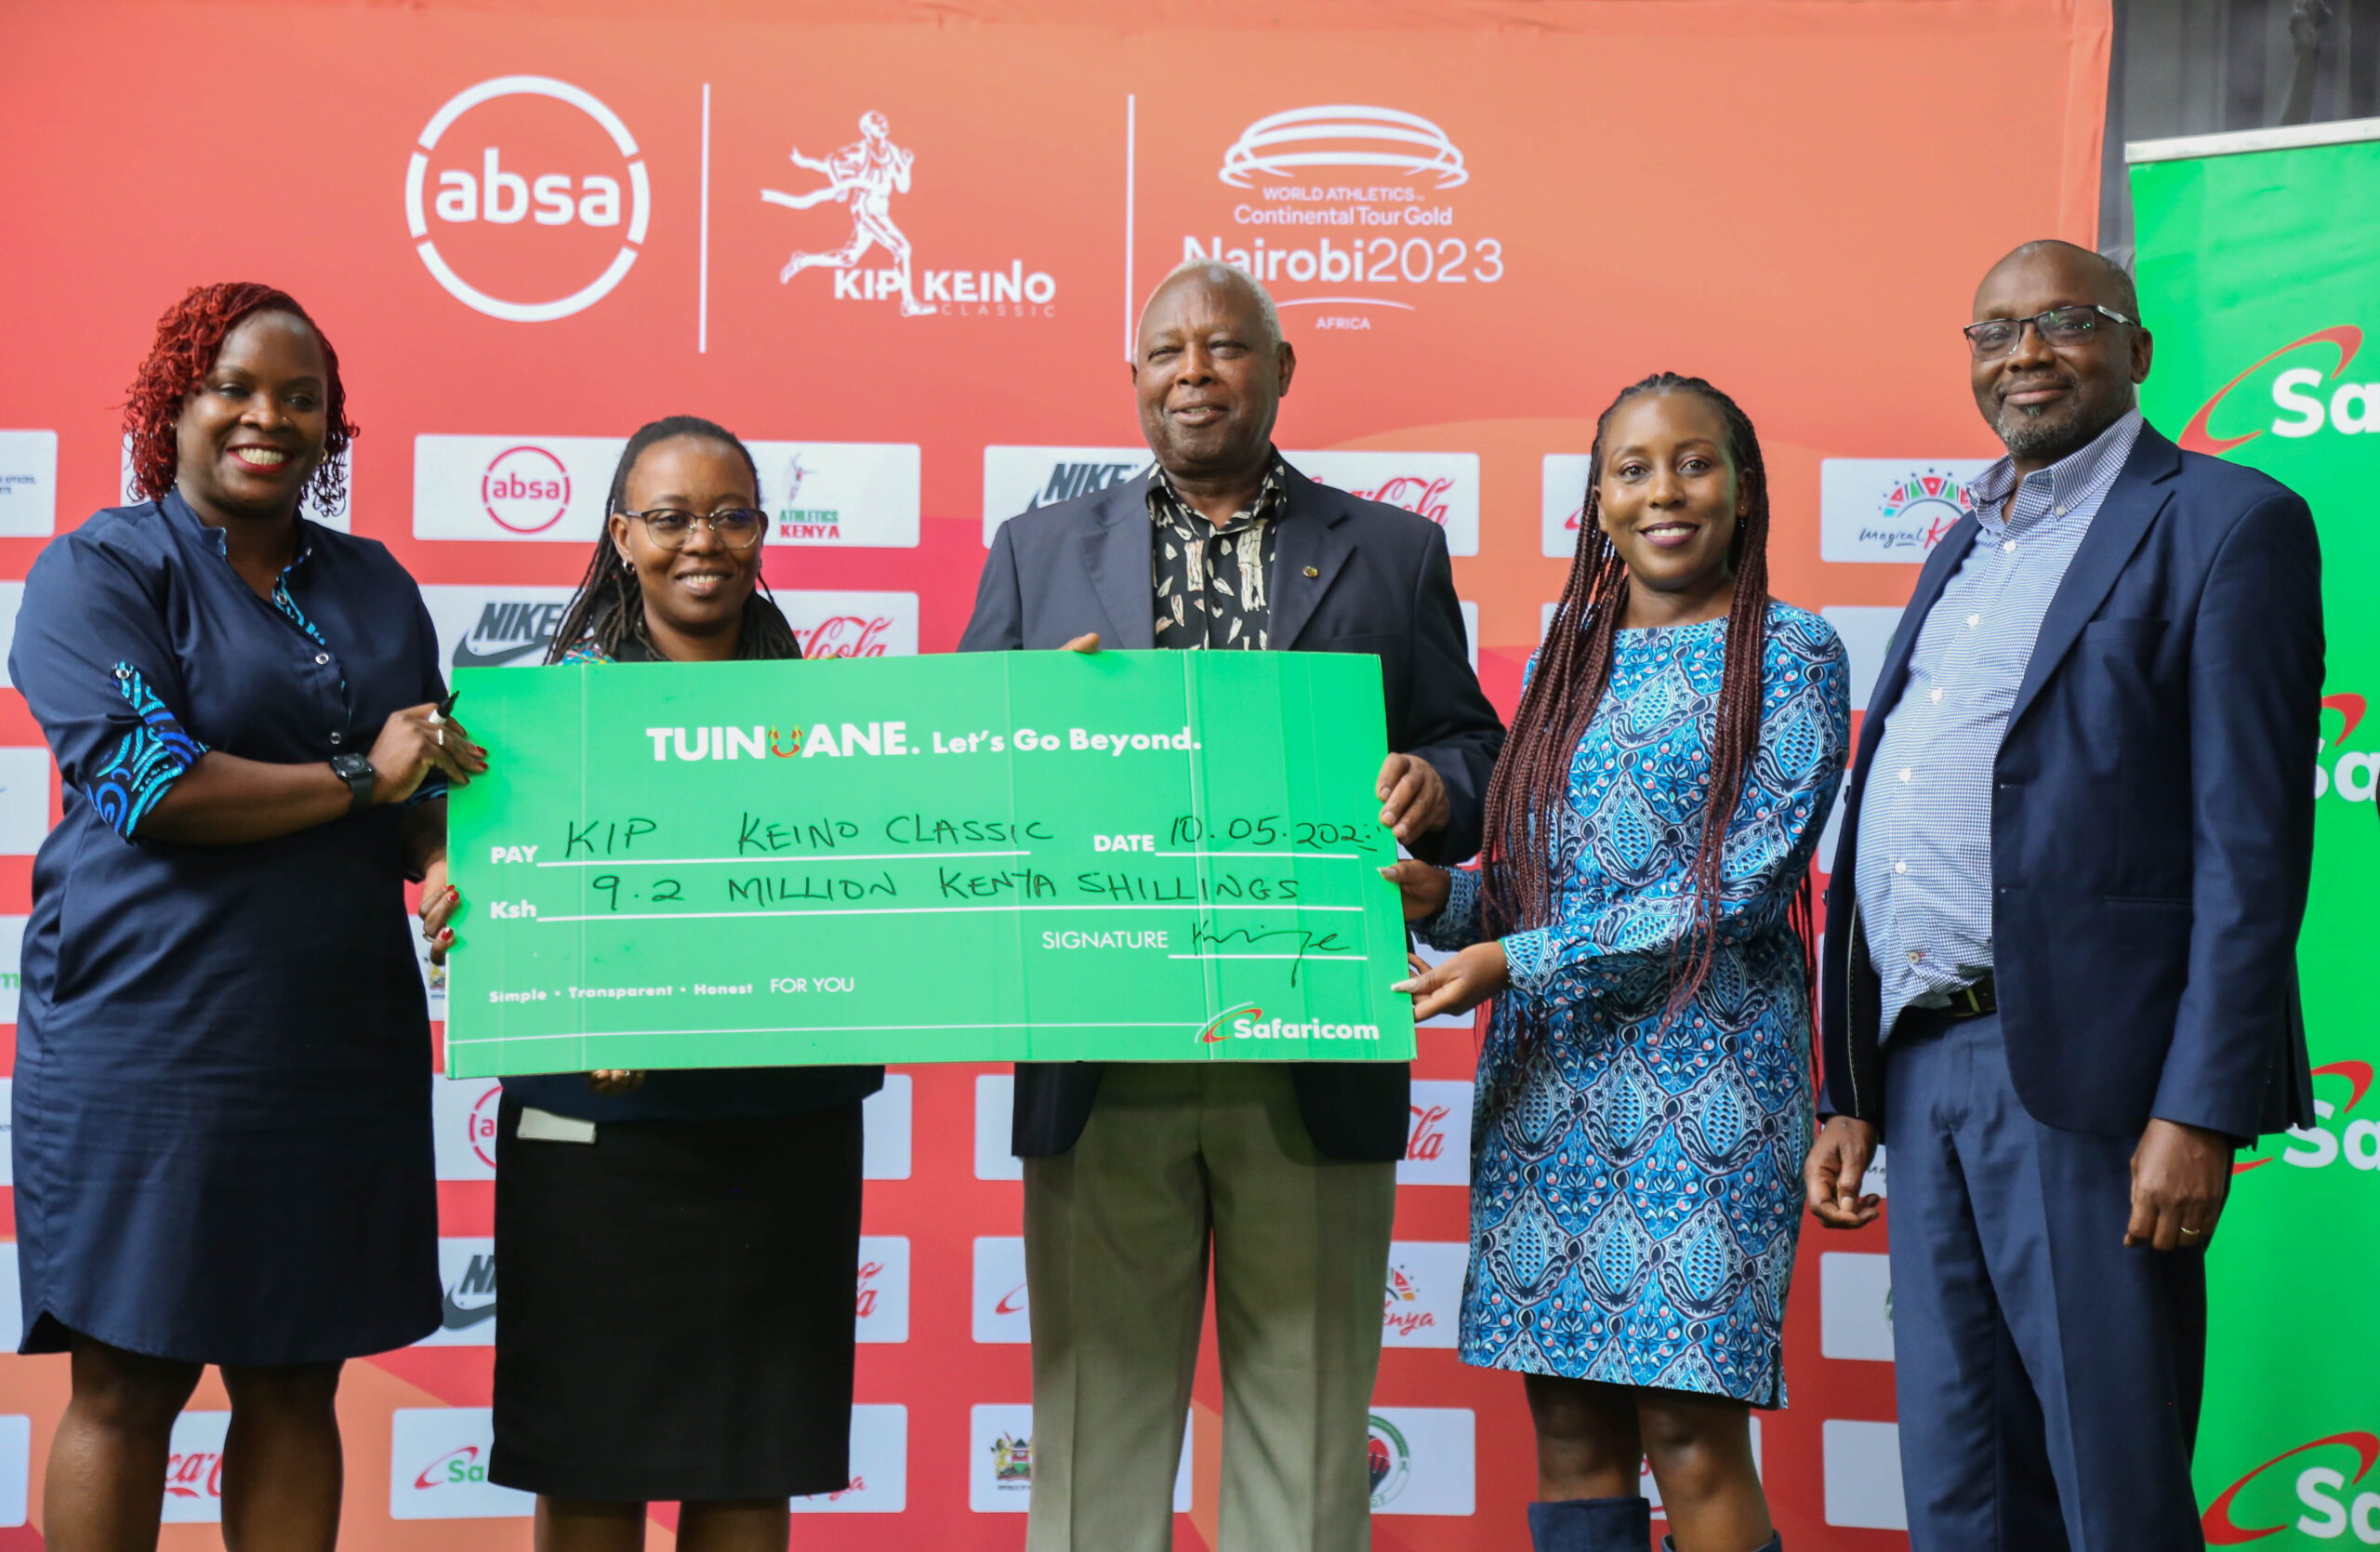 The sponsorship will include internet access at the event to assist essential functional areas like the media center and streaming services, as well as KES 2.2 million in monetary incentives for competitors who break records, with each participant receiving KES 250,000